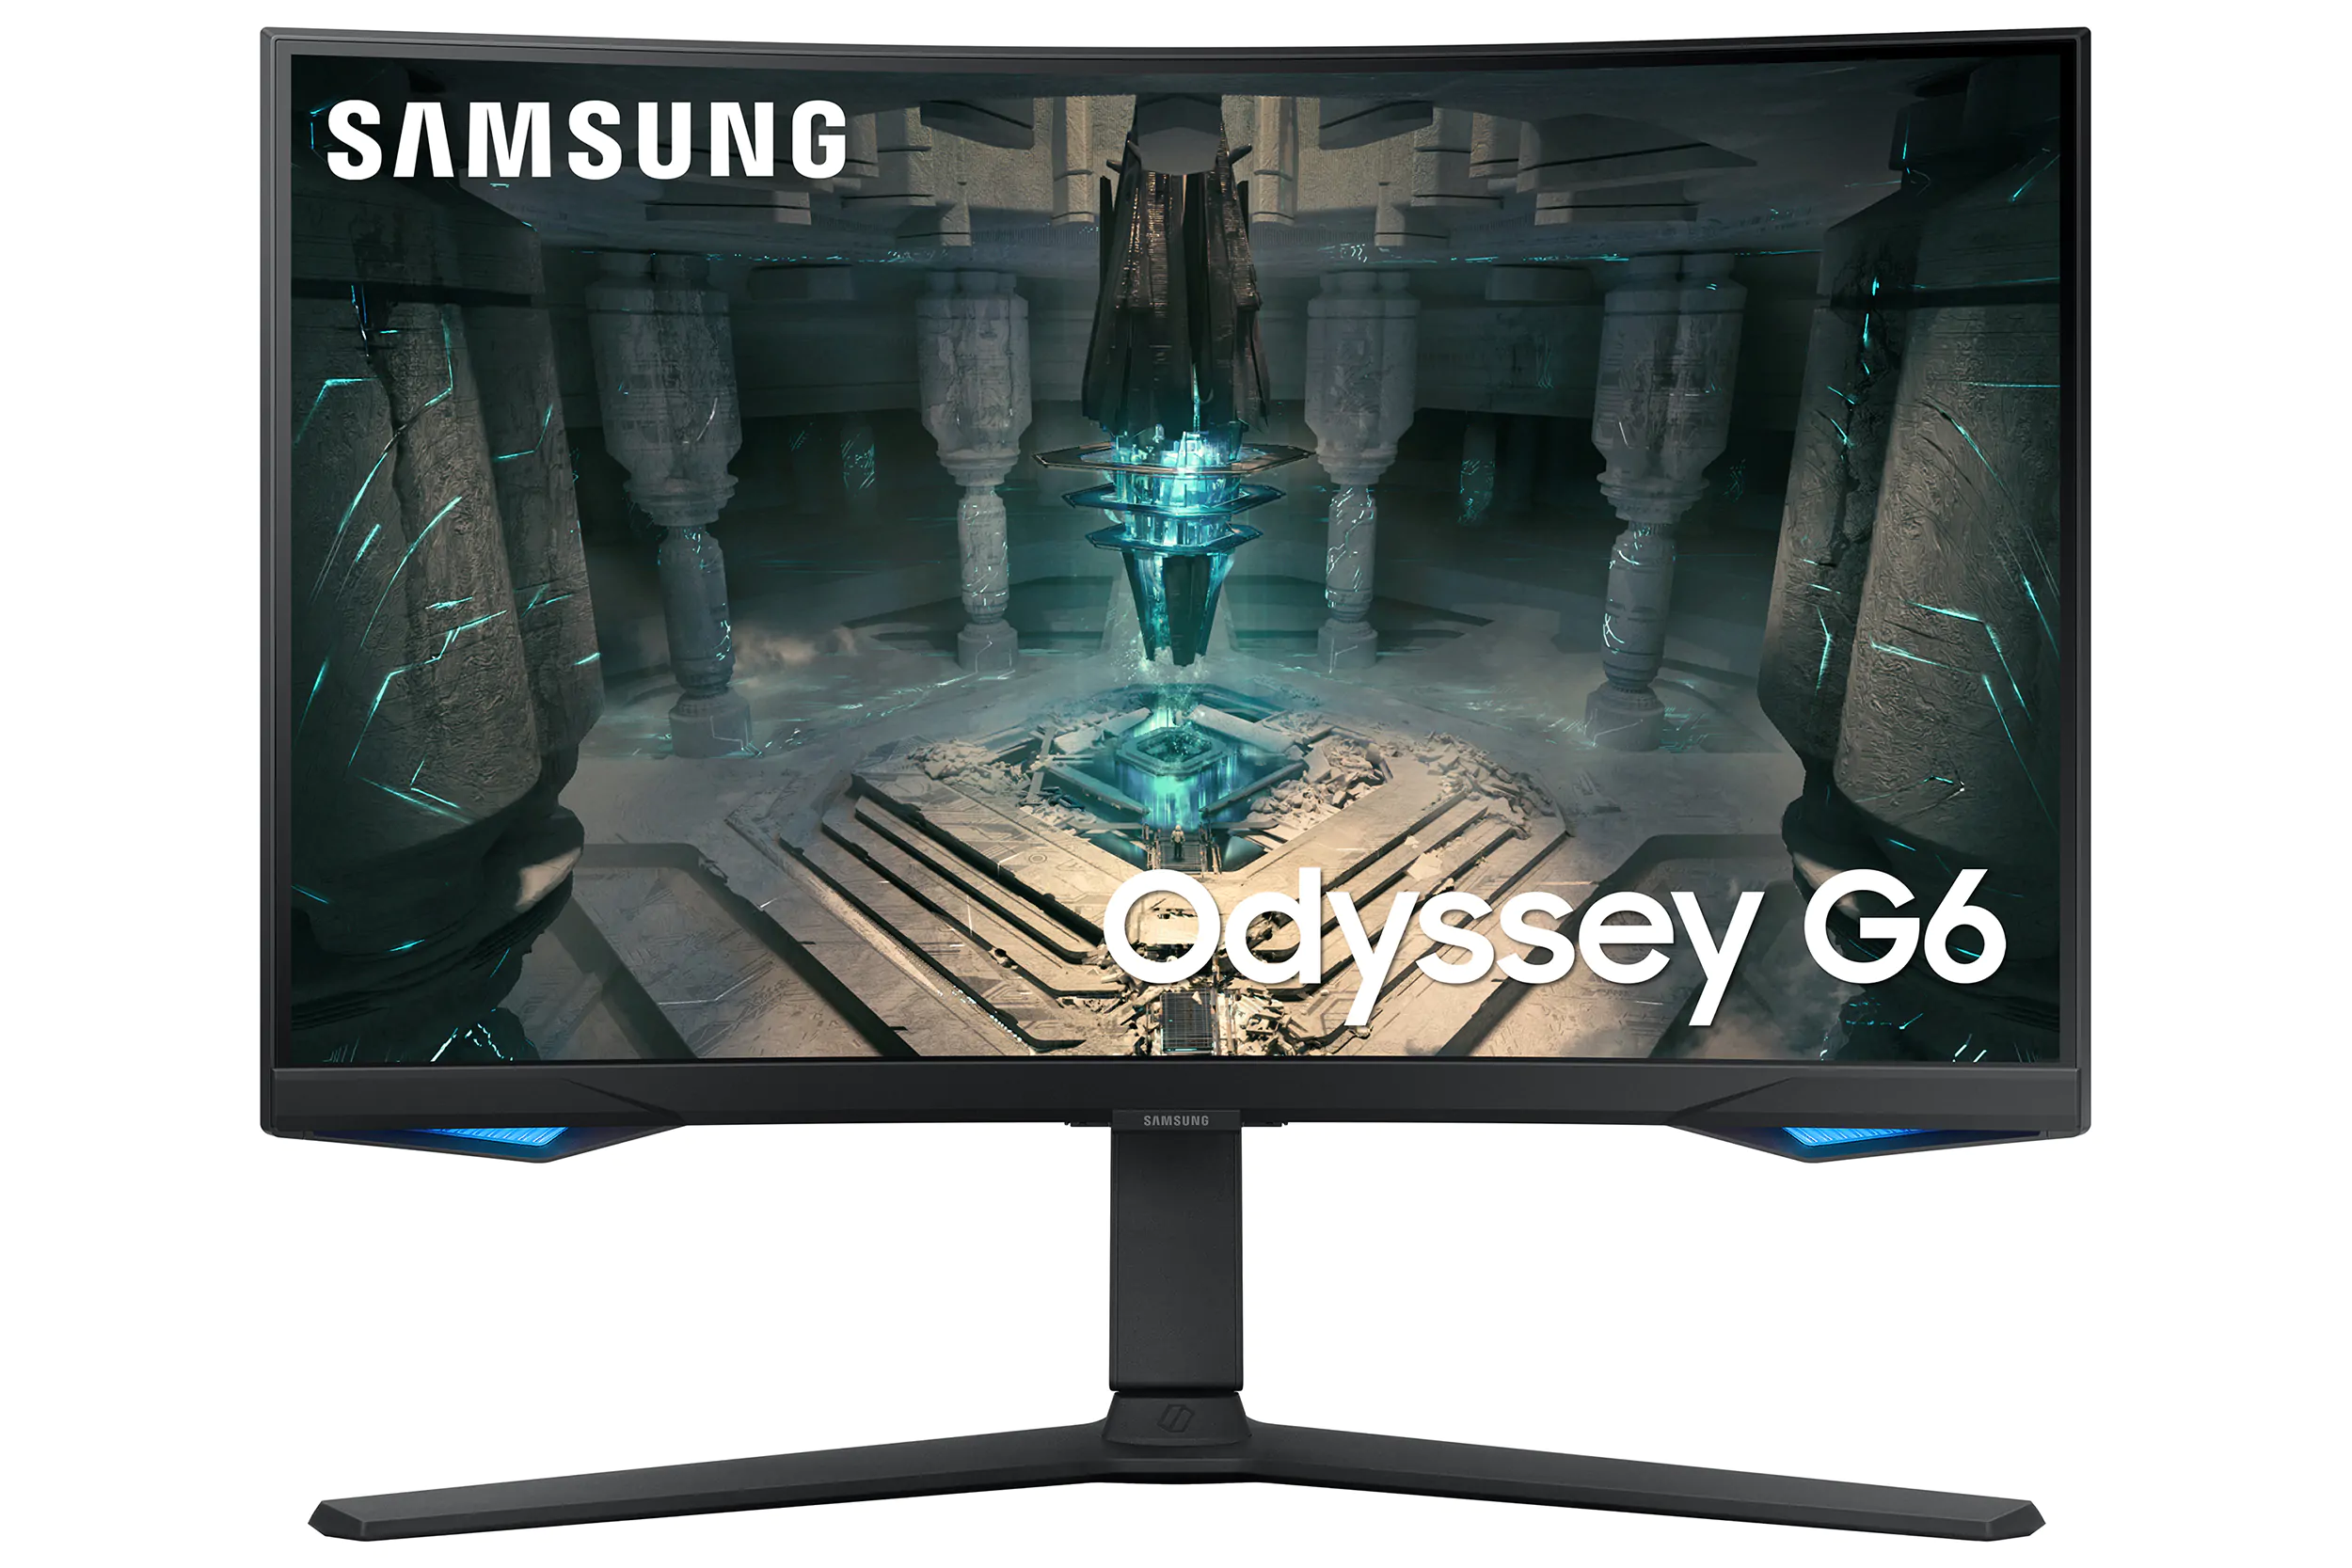 Samsung's new Odyssey series introduced